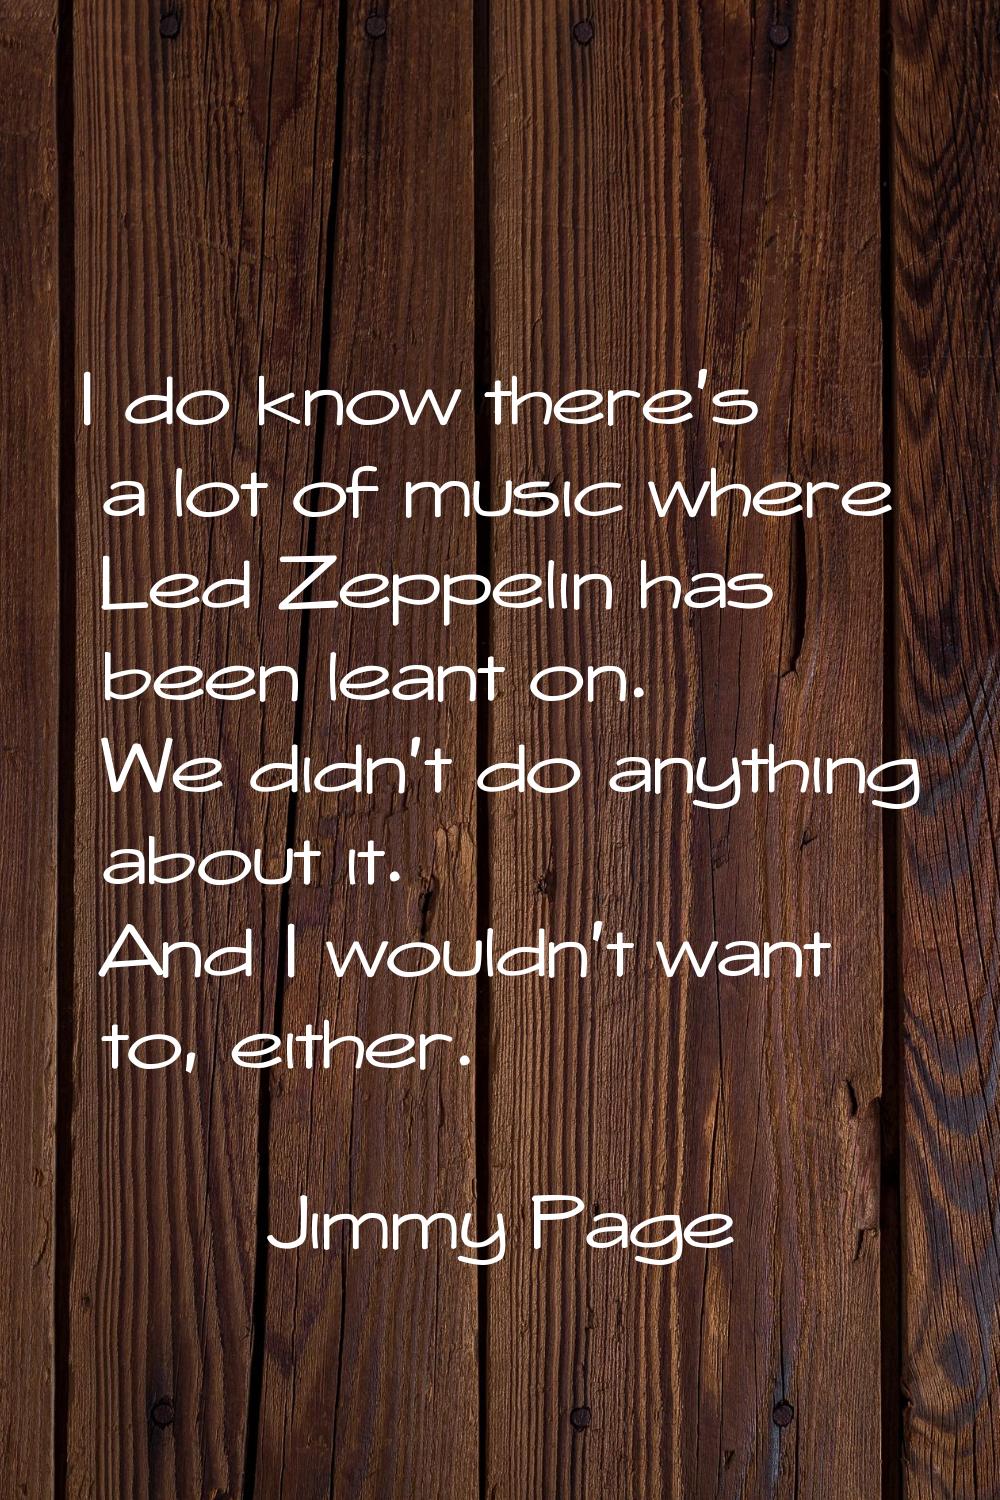 I do know there's a lot of music where Led Zeppelin has been leant on. We didn't do anything about 